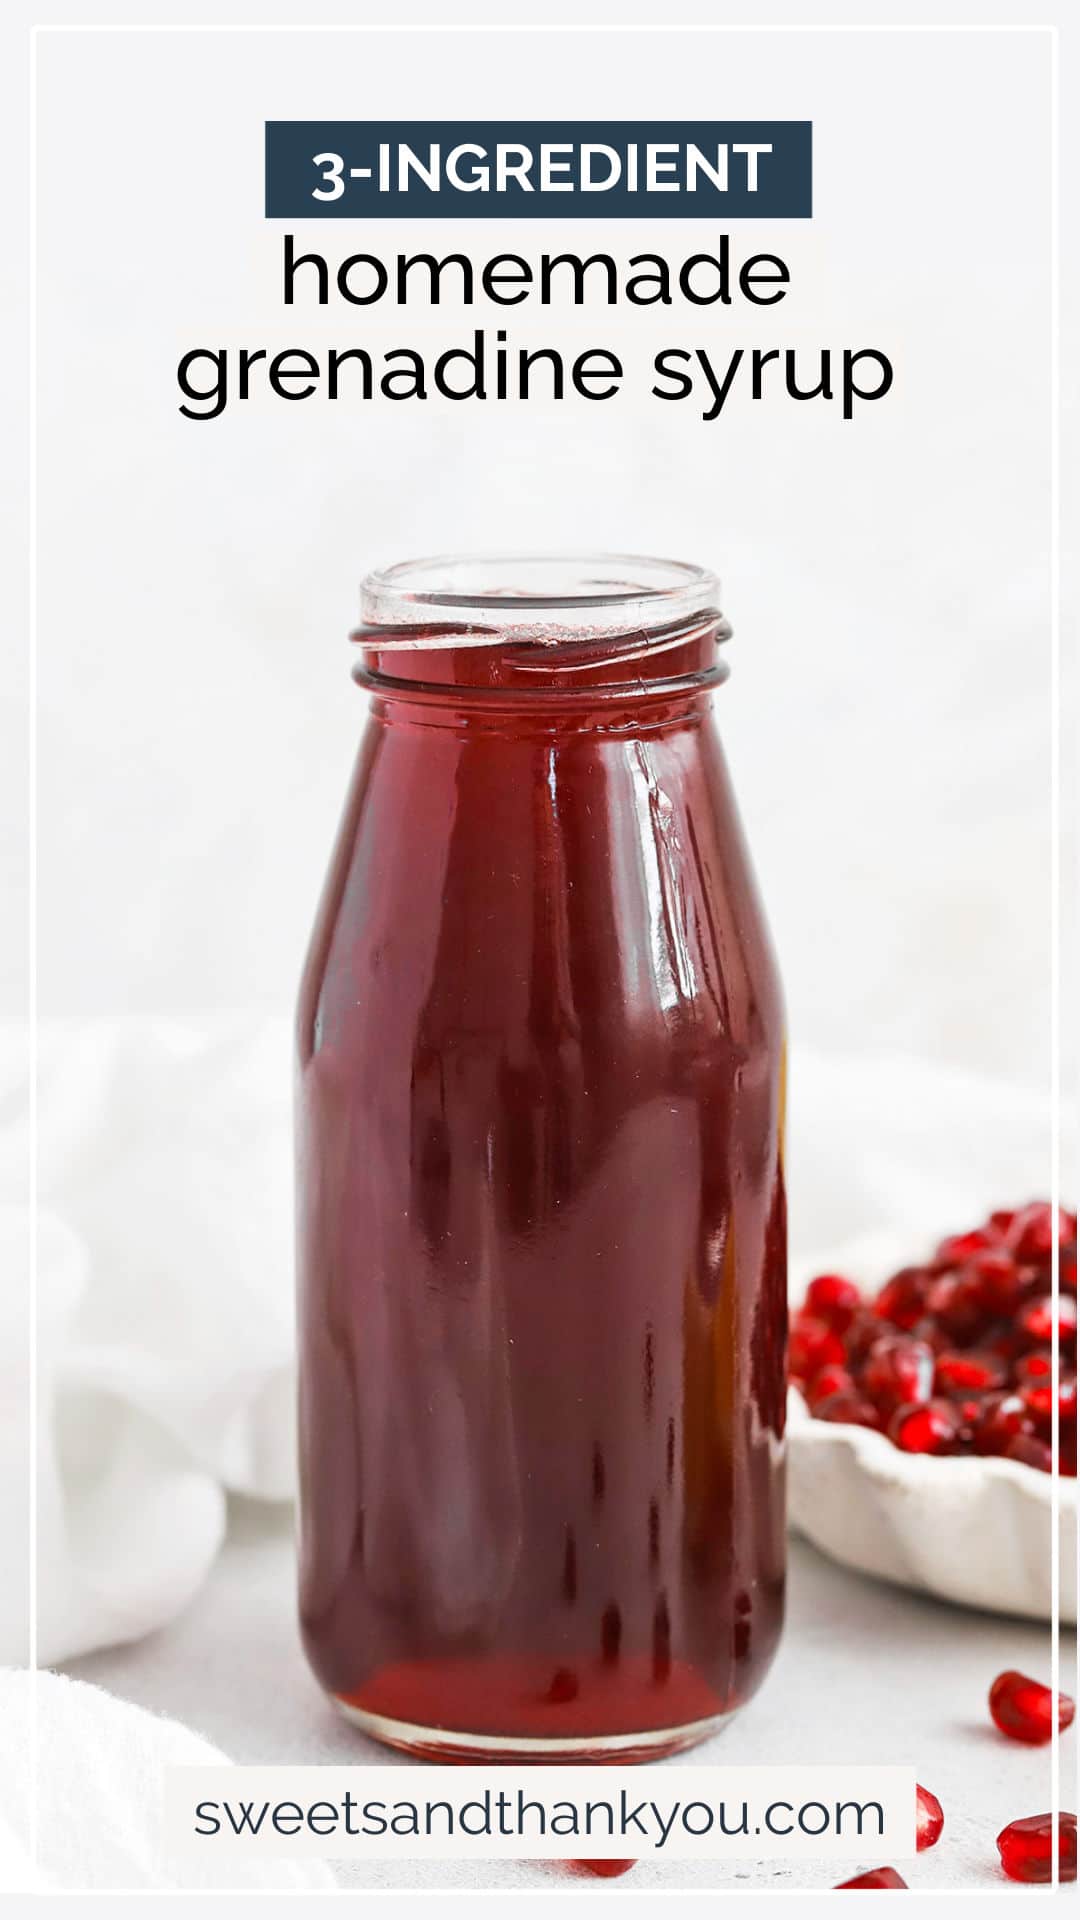 How To Make Homemade Grenadine Syrup - This grenadine syrup recipe couldn't be easier! It takes 3 ingredients and just a few minutes. You'll love the gorgeous color and flavor it adds to your favorite drinks! // How to make grenadine syrup // grenadine recipe // what’s in grenadine // grenadine ingredients // is grenadine cherry or pomegranate // grenadine mocktails // grenadine drinks // mocktail recipes // non alcoholic drinks //